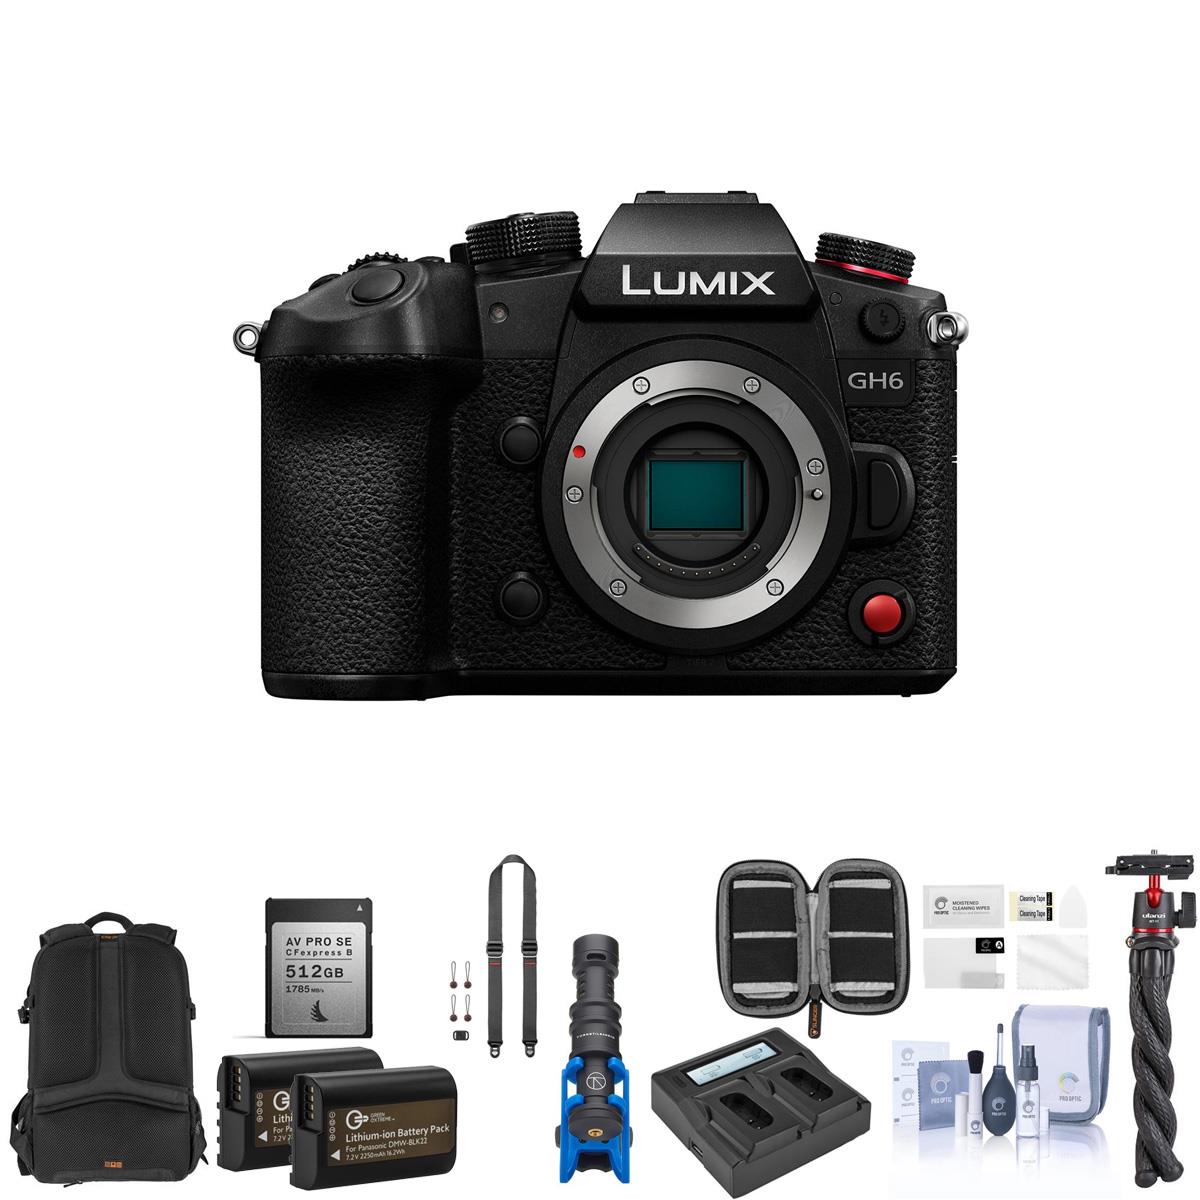 Panasonic Lumix GH6 Mirrorless Camera Body with Complete Accessories Kit